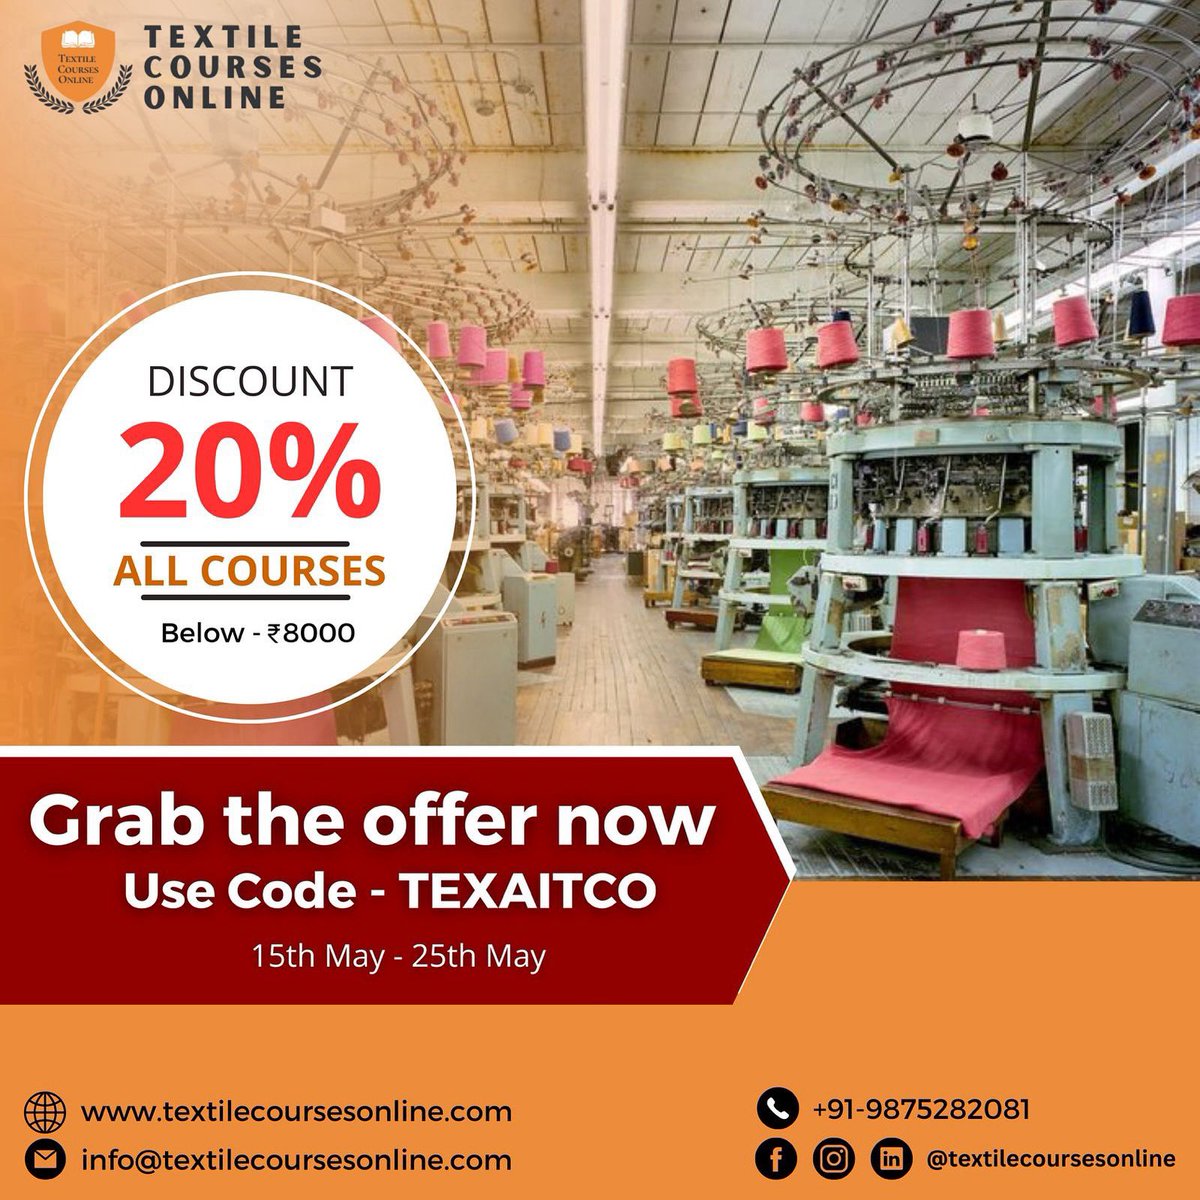 Unlock Your Potential with TEXAITCO! Enjoy 20% off on all courses under 8000. Don’t miss out - offer valid from tomorrow till 25th May. Enroll now for a brighter future

#textilecourses #onlinelearning #fashioneducation #trims101 #fashionindustry #fashionprofessionals